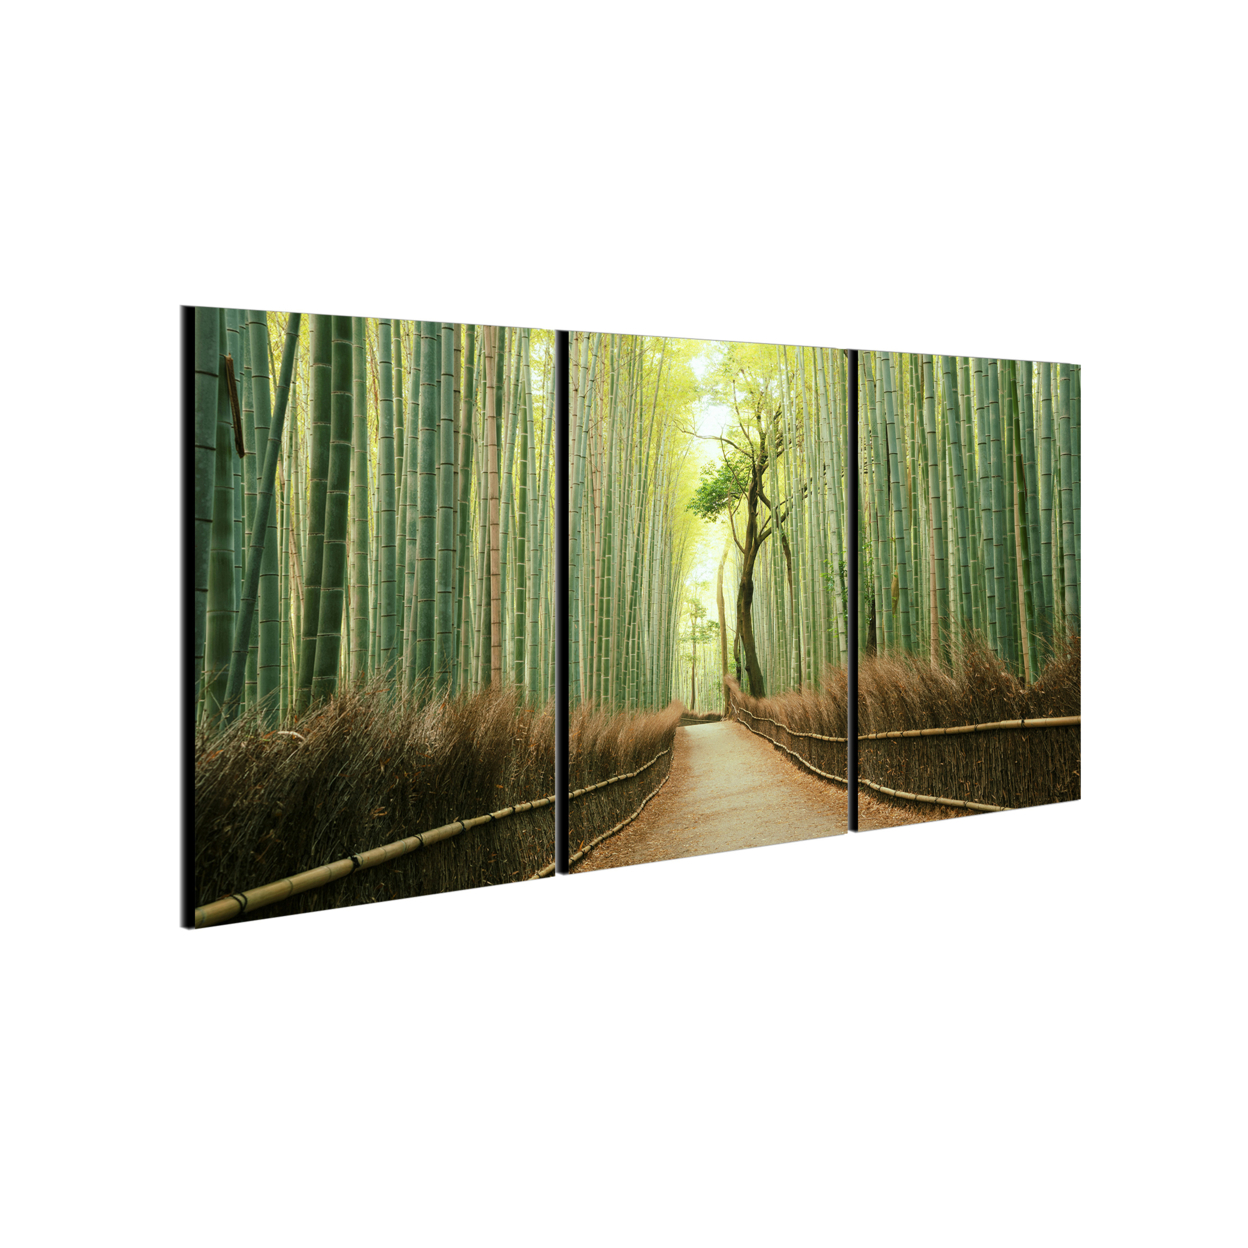 Pine Road 3 Piece Wrapped Canvas Wall Art Print 20x40.5 Inches